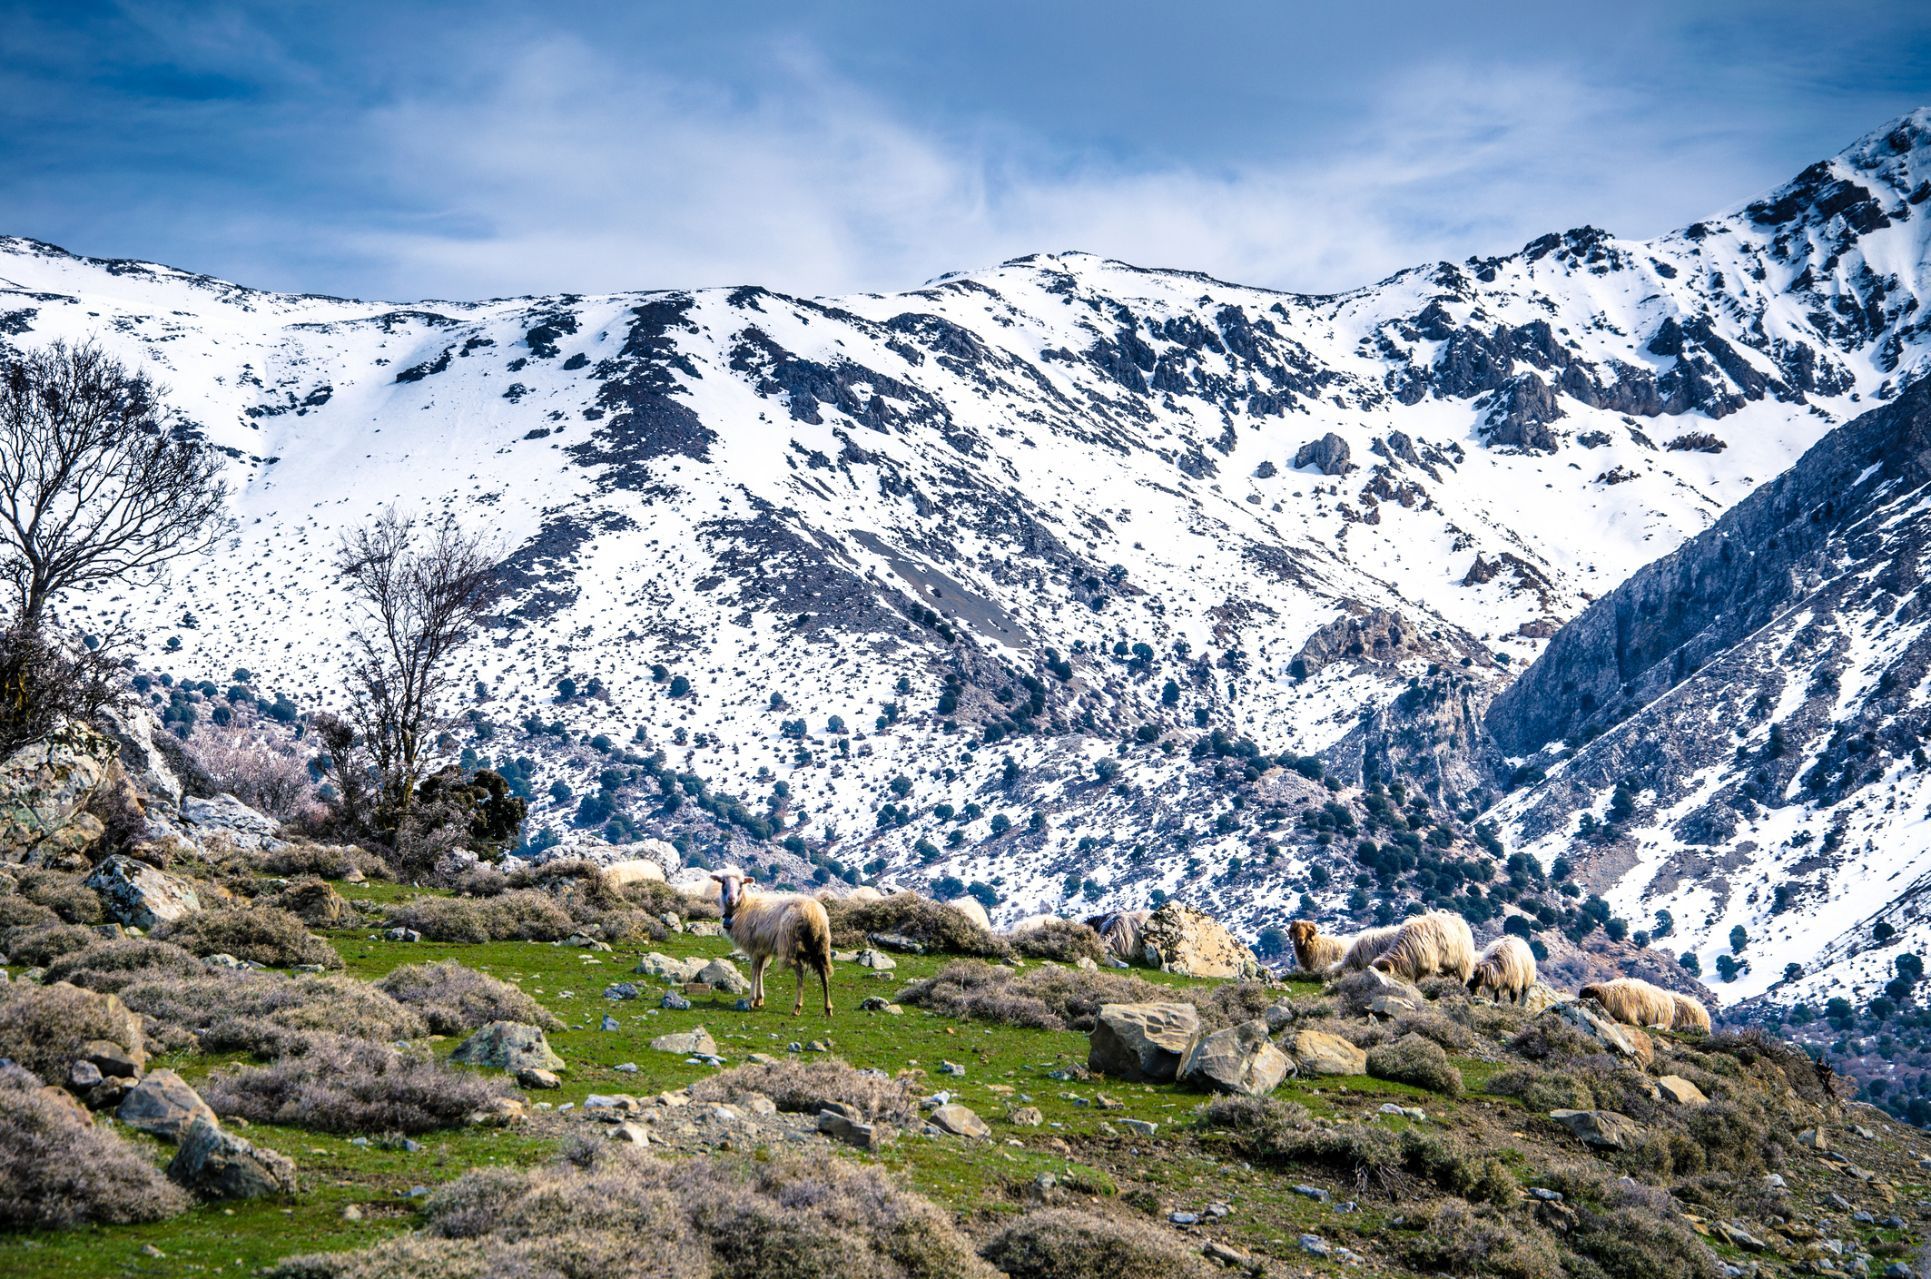 Snow in the White Mountains of Crete, during the colder months. Photo: Getty.